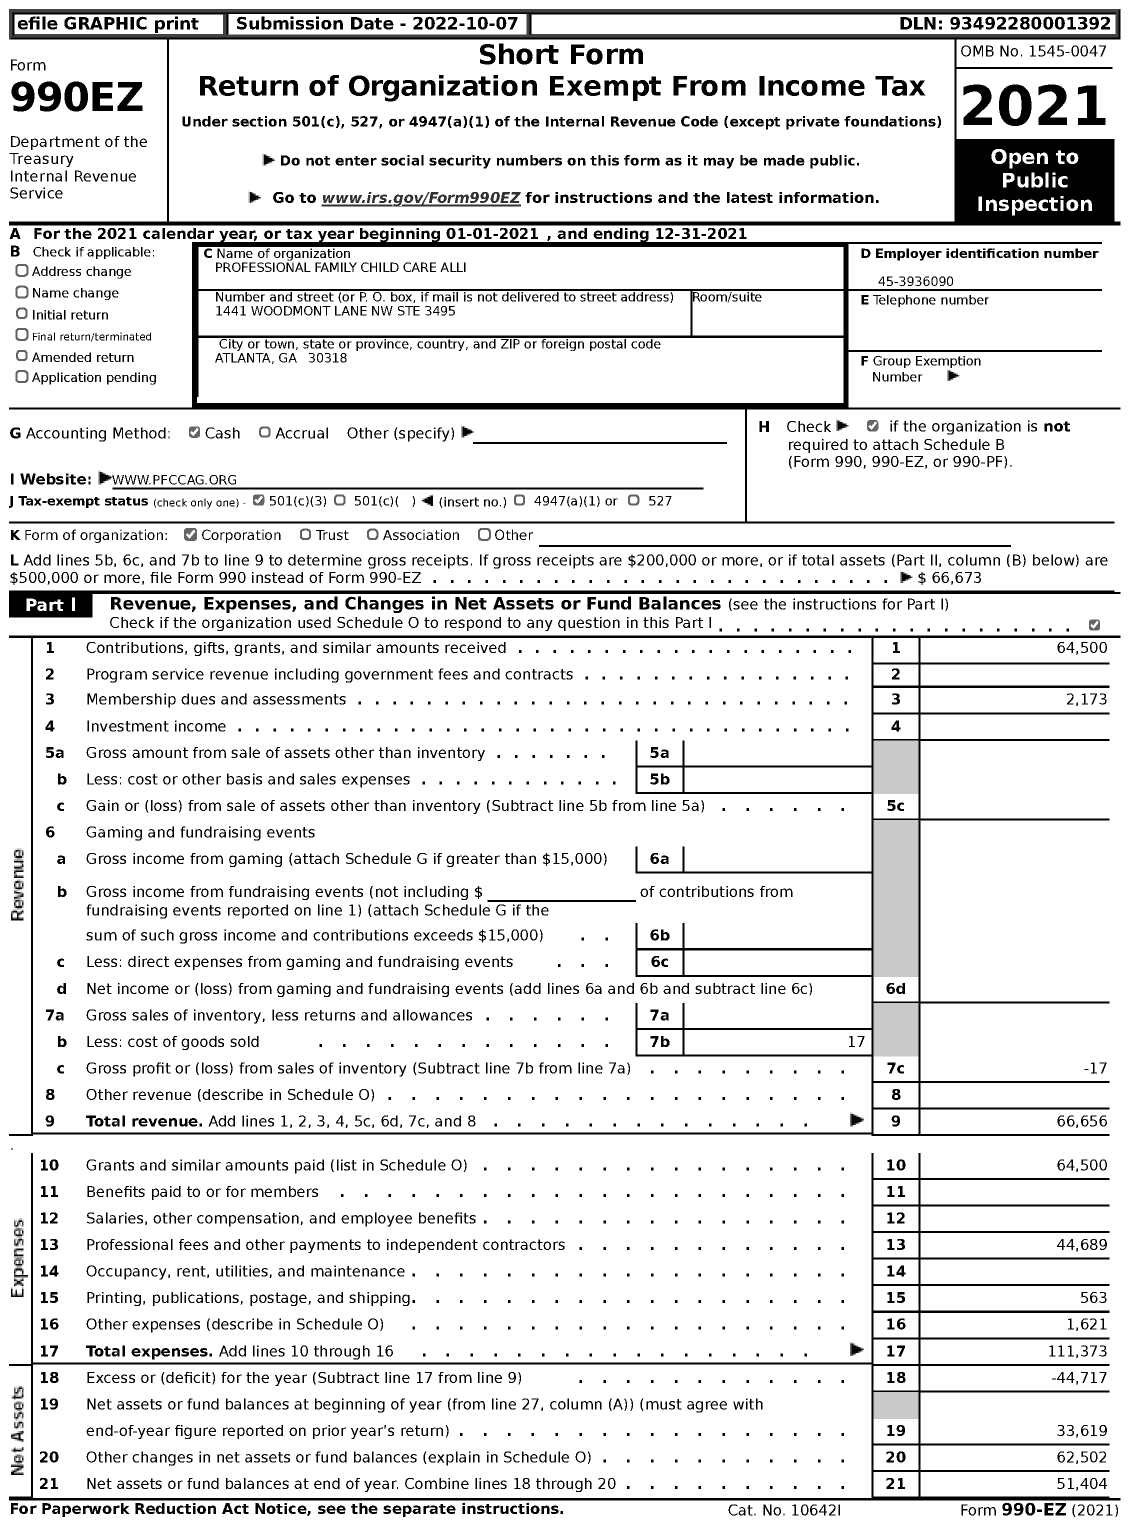 Image of first page of 2021 Form 990EZ for Professional Family Child Care Alliance